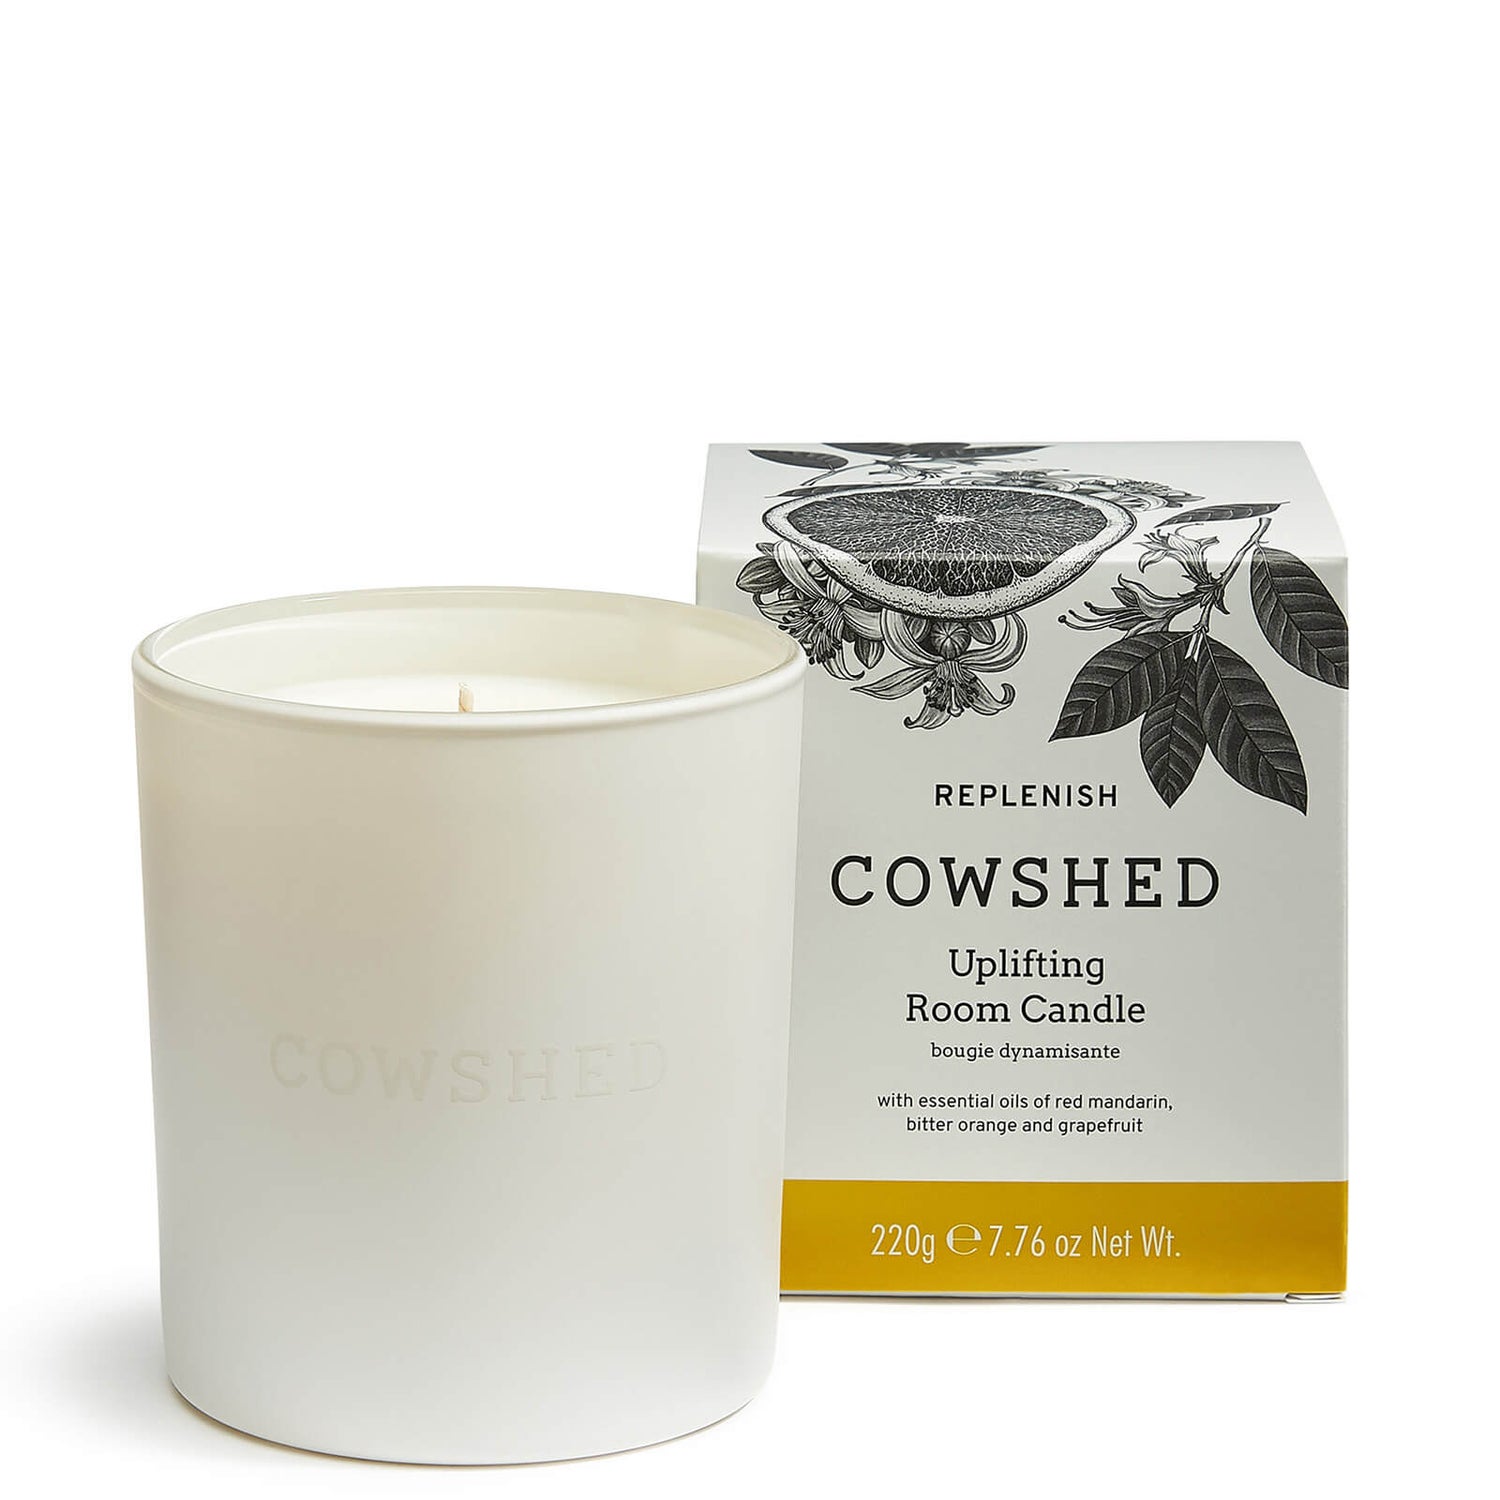 Cowshed REPLENISH Uplifting Room Candle